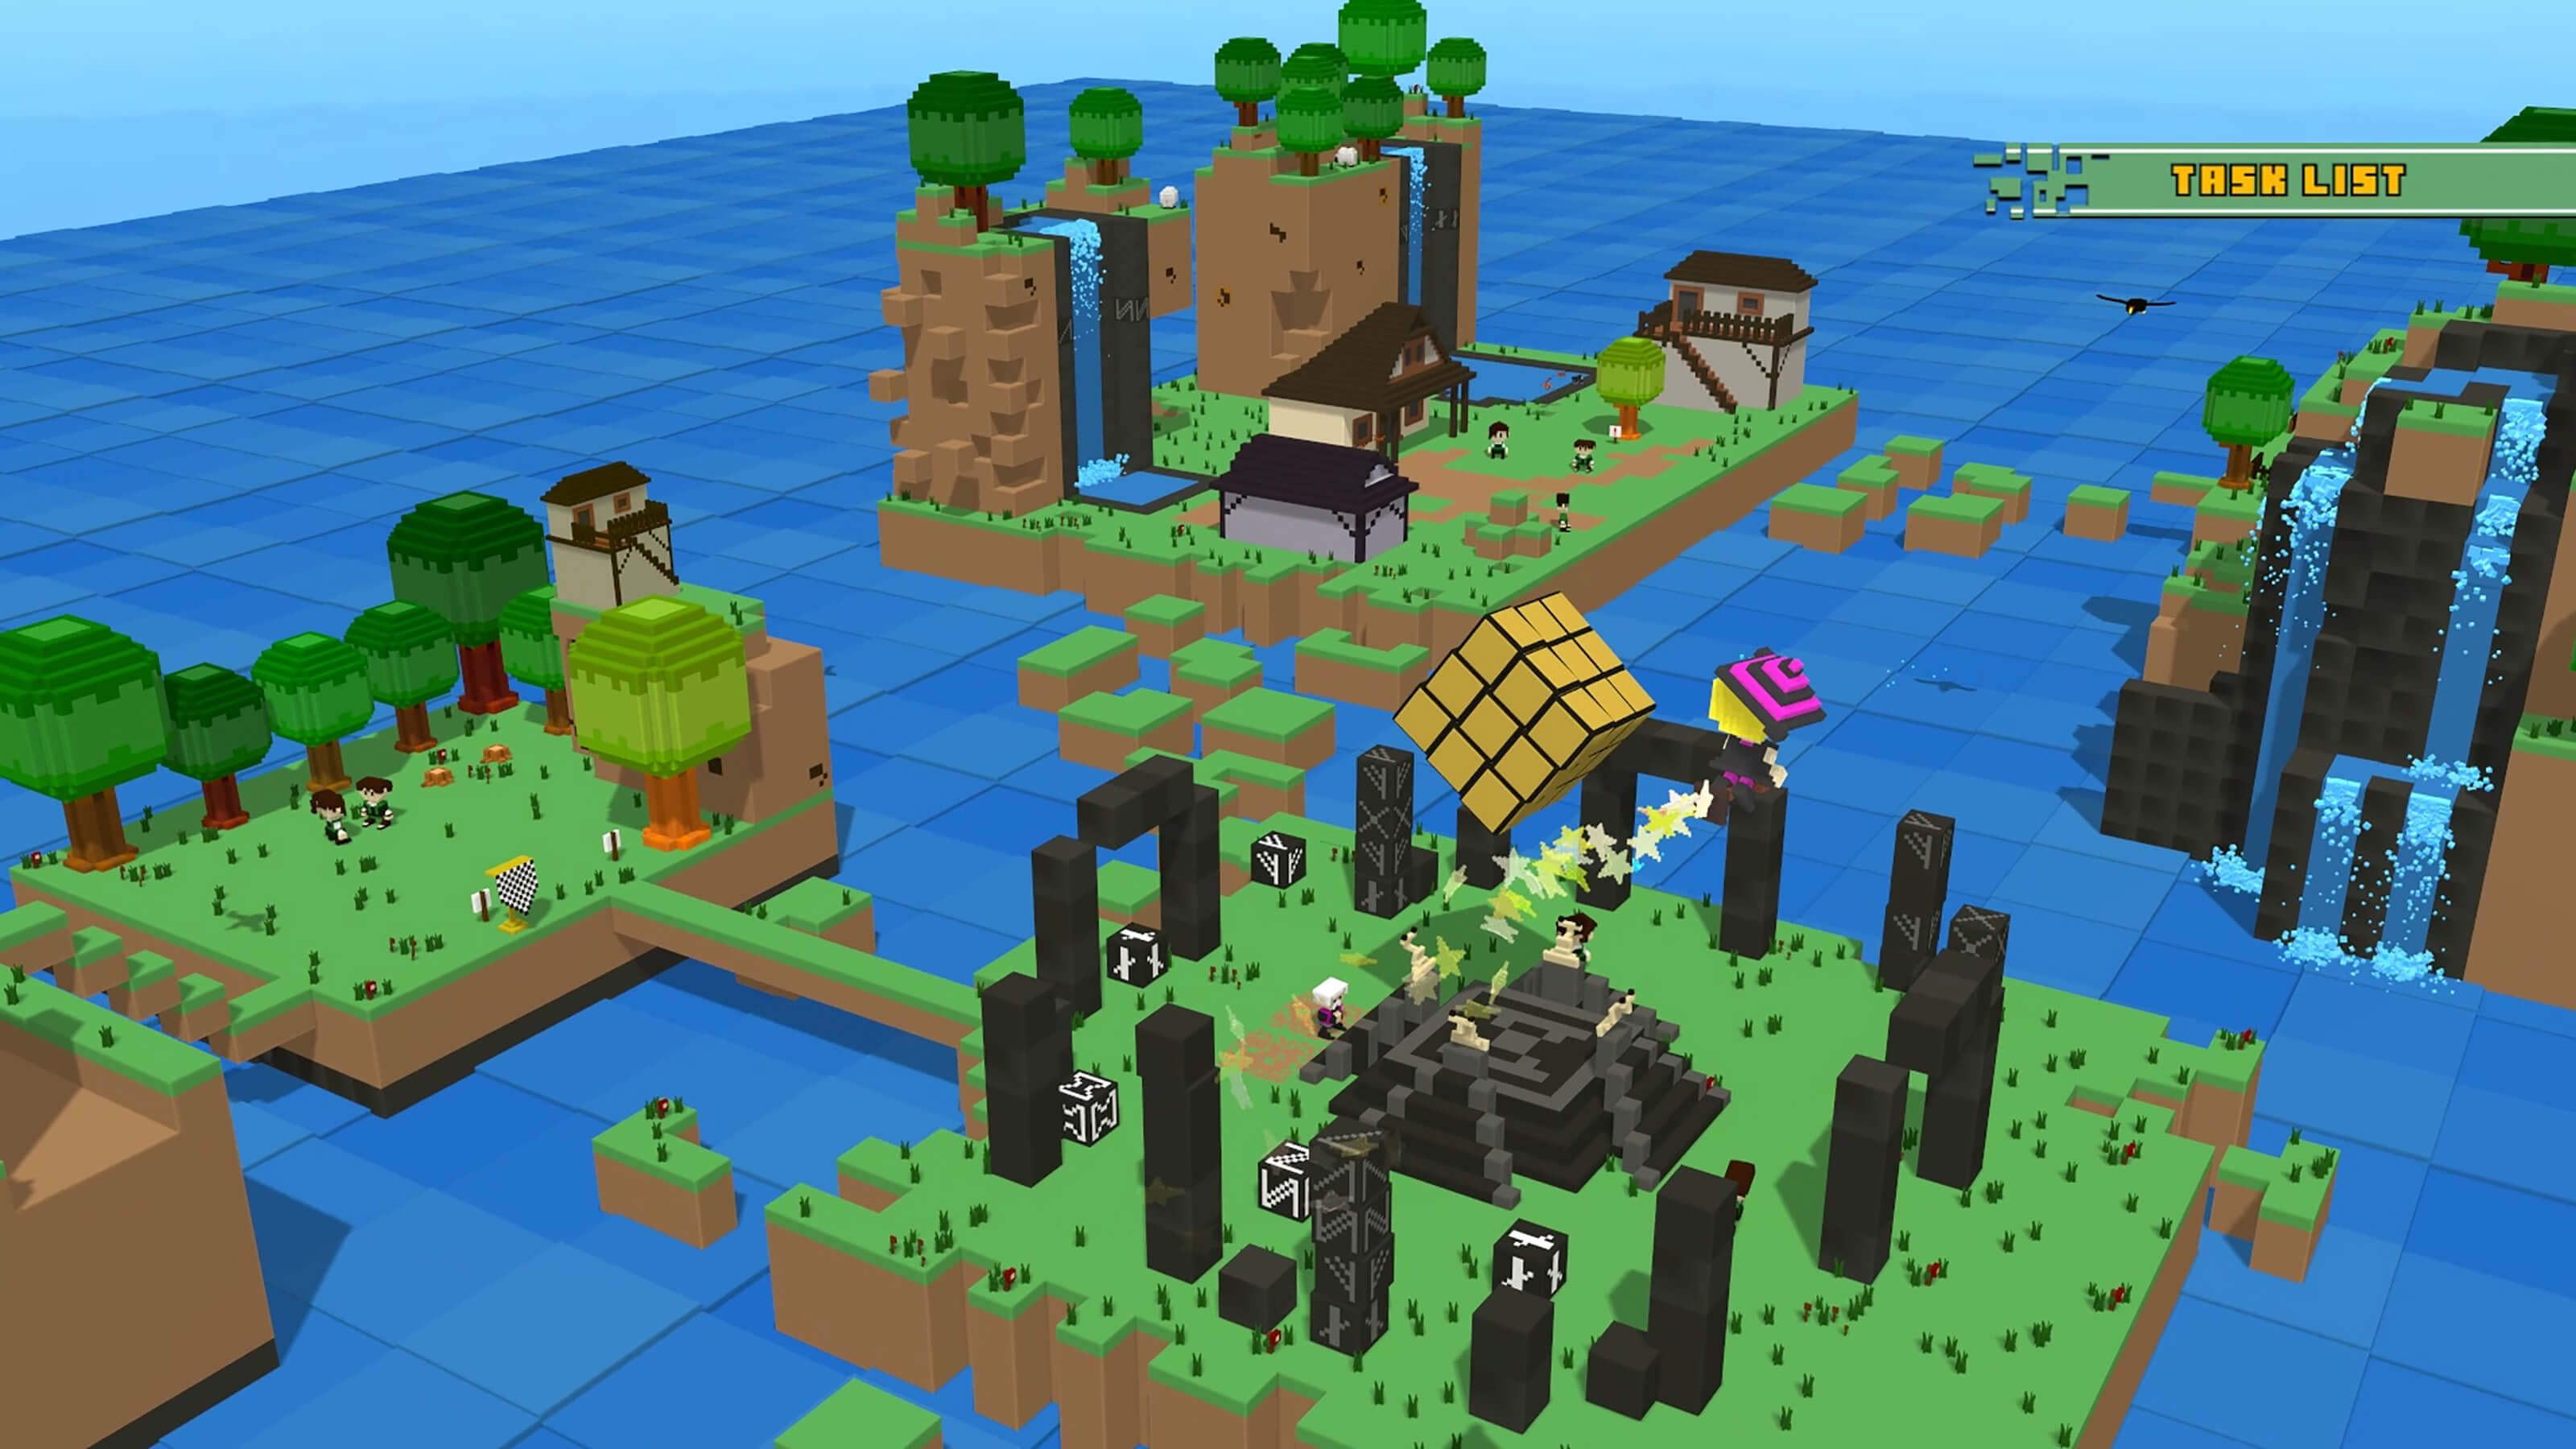 Isometric view of a 3D voxel world, made of green islands filled with ruins, villages, and waterfalls.